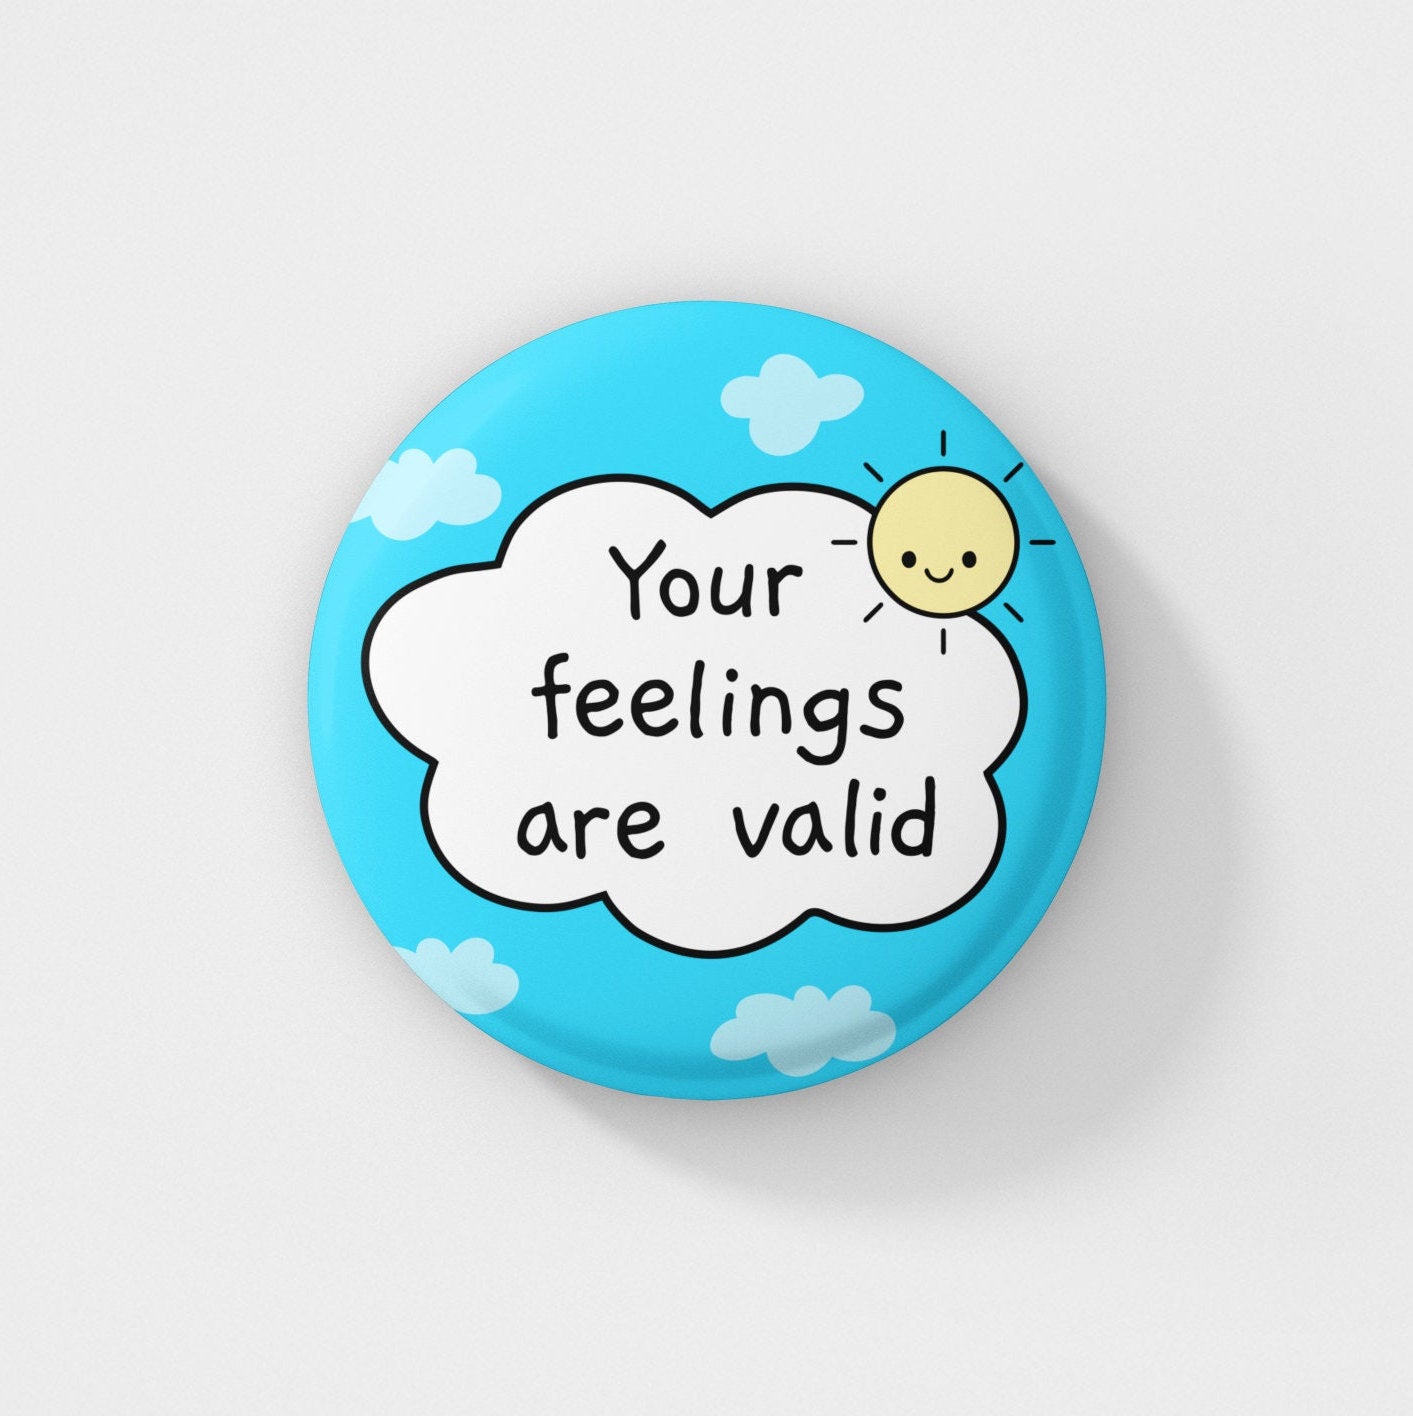 Your Feelings Are Valid Pin Badge | Mental Health Badge, Wellbeing Pins, Positive Quotes